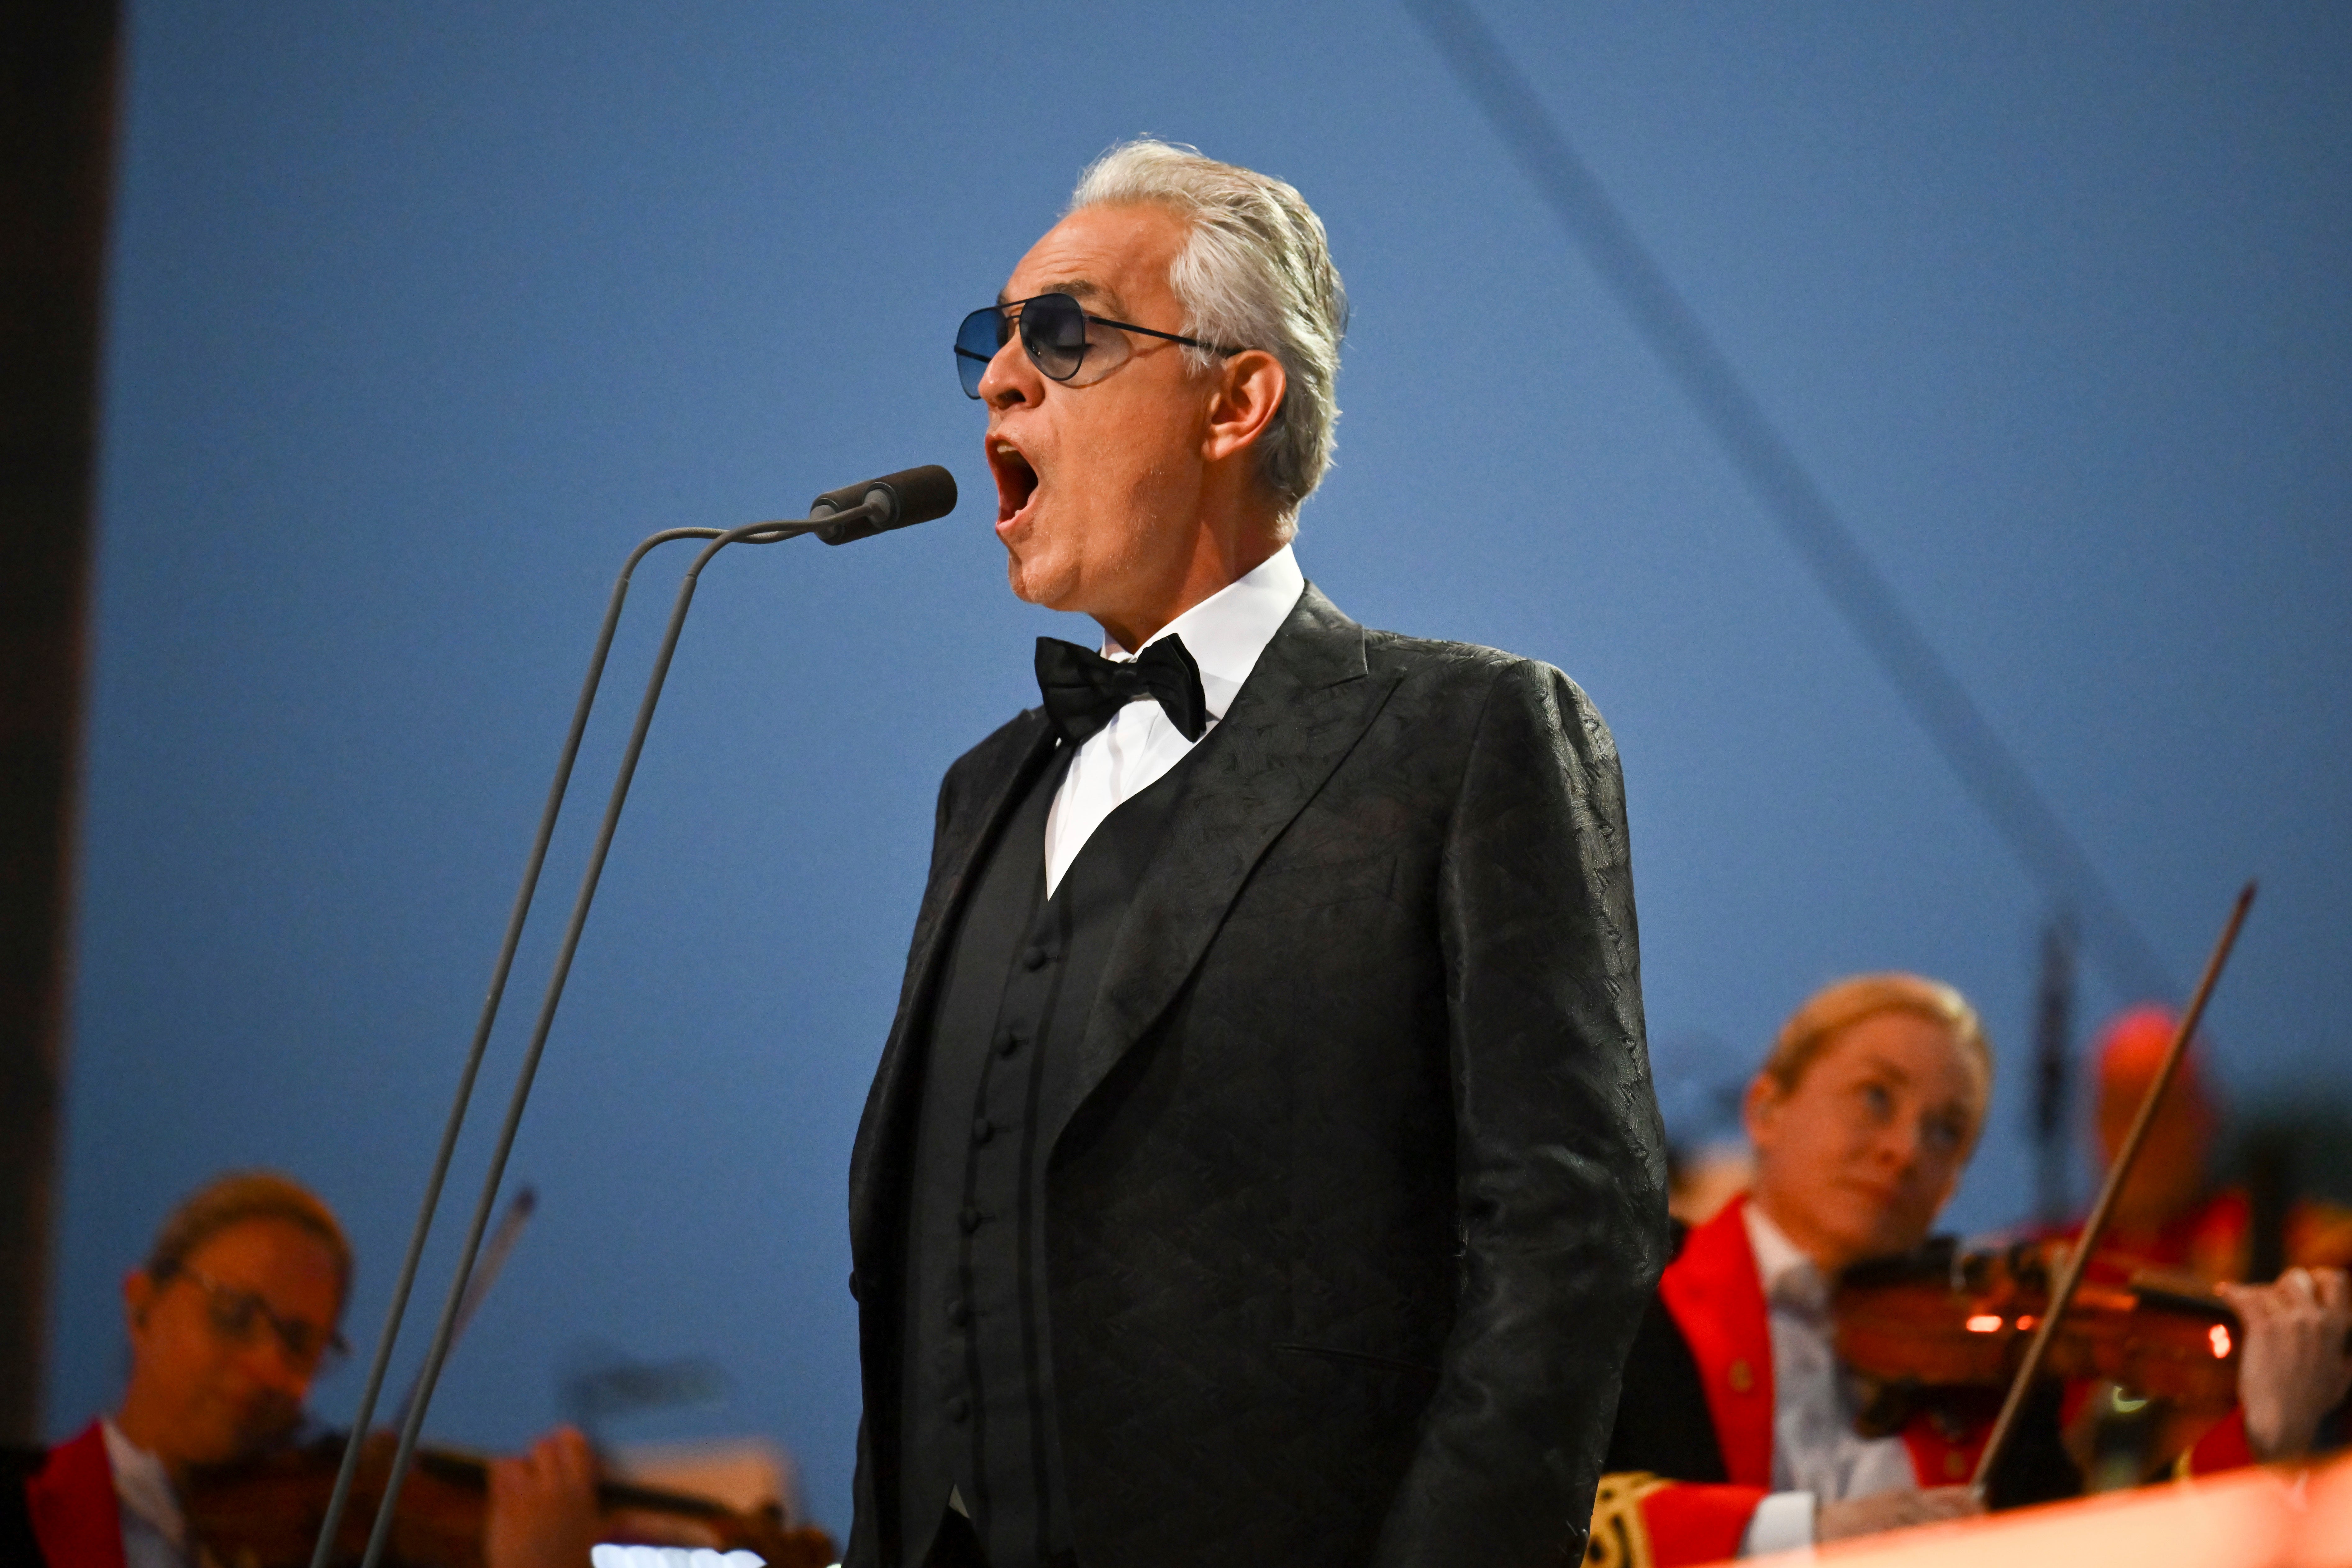 Andrea Bocelli has also been added to the line-up